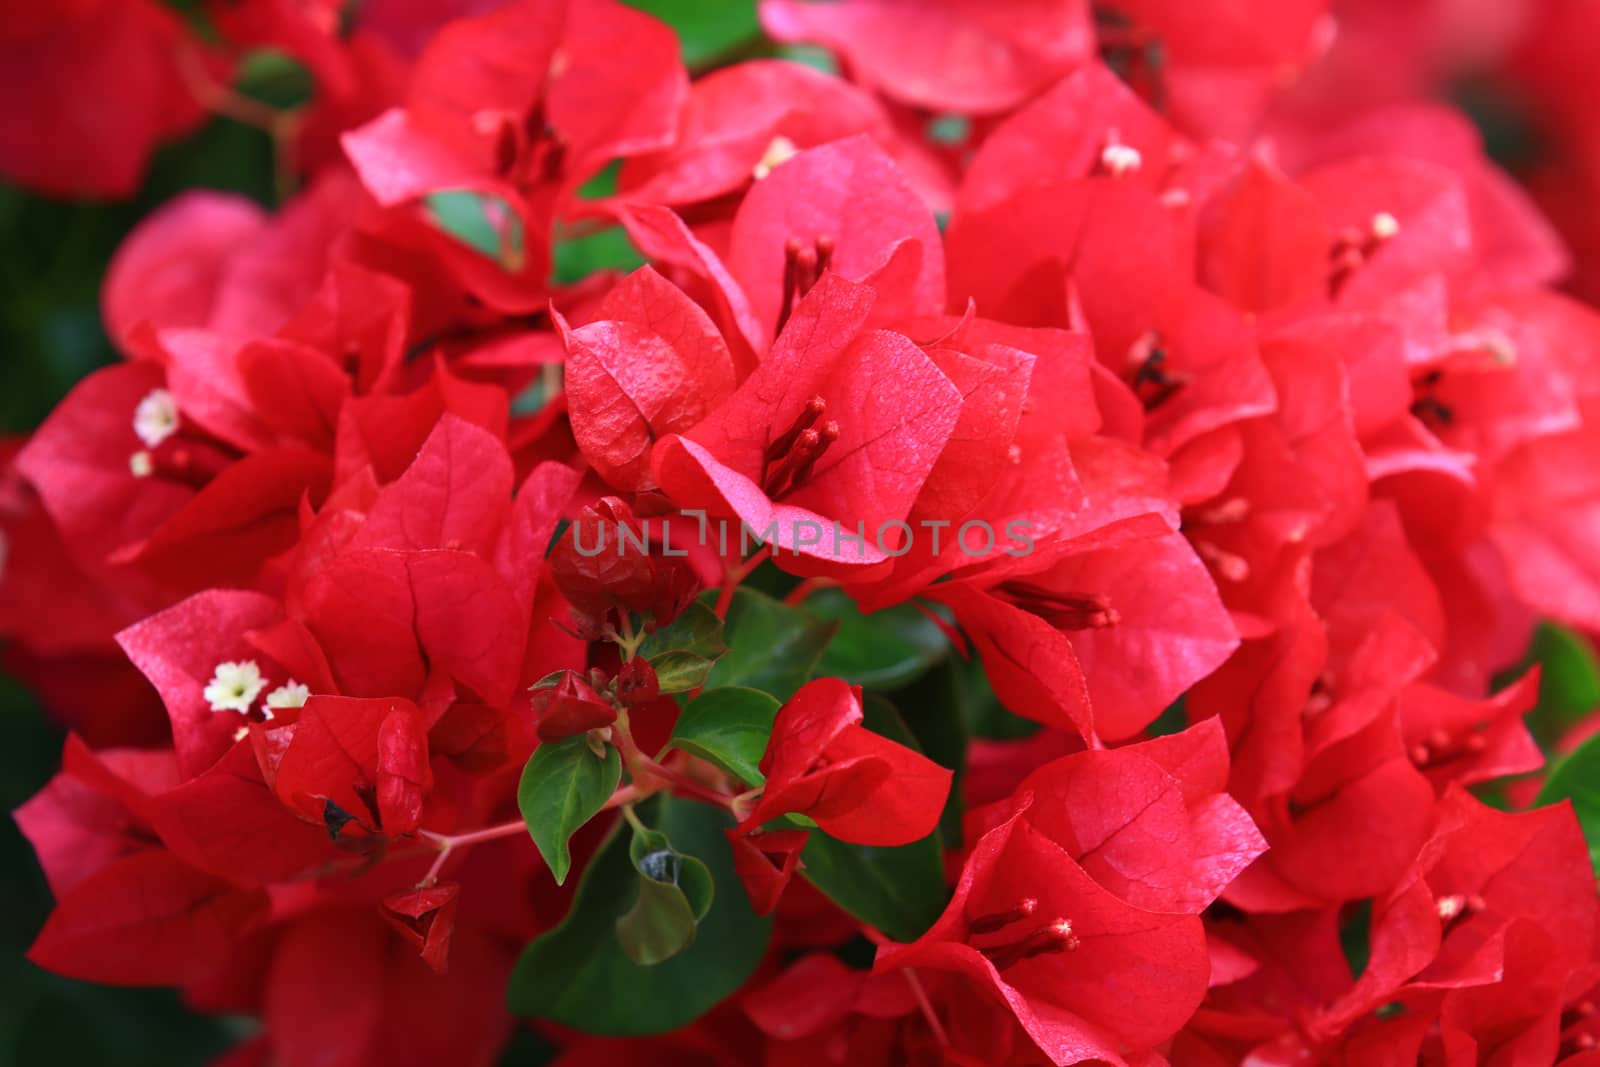 Beautiful red bougainvillea flower with branch and leaf blooming,Close-up red bougainvillea flowers as a floral background and texture